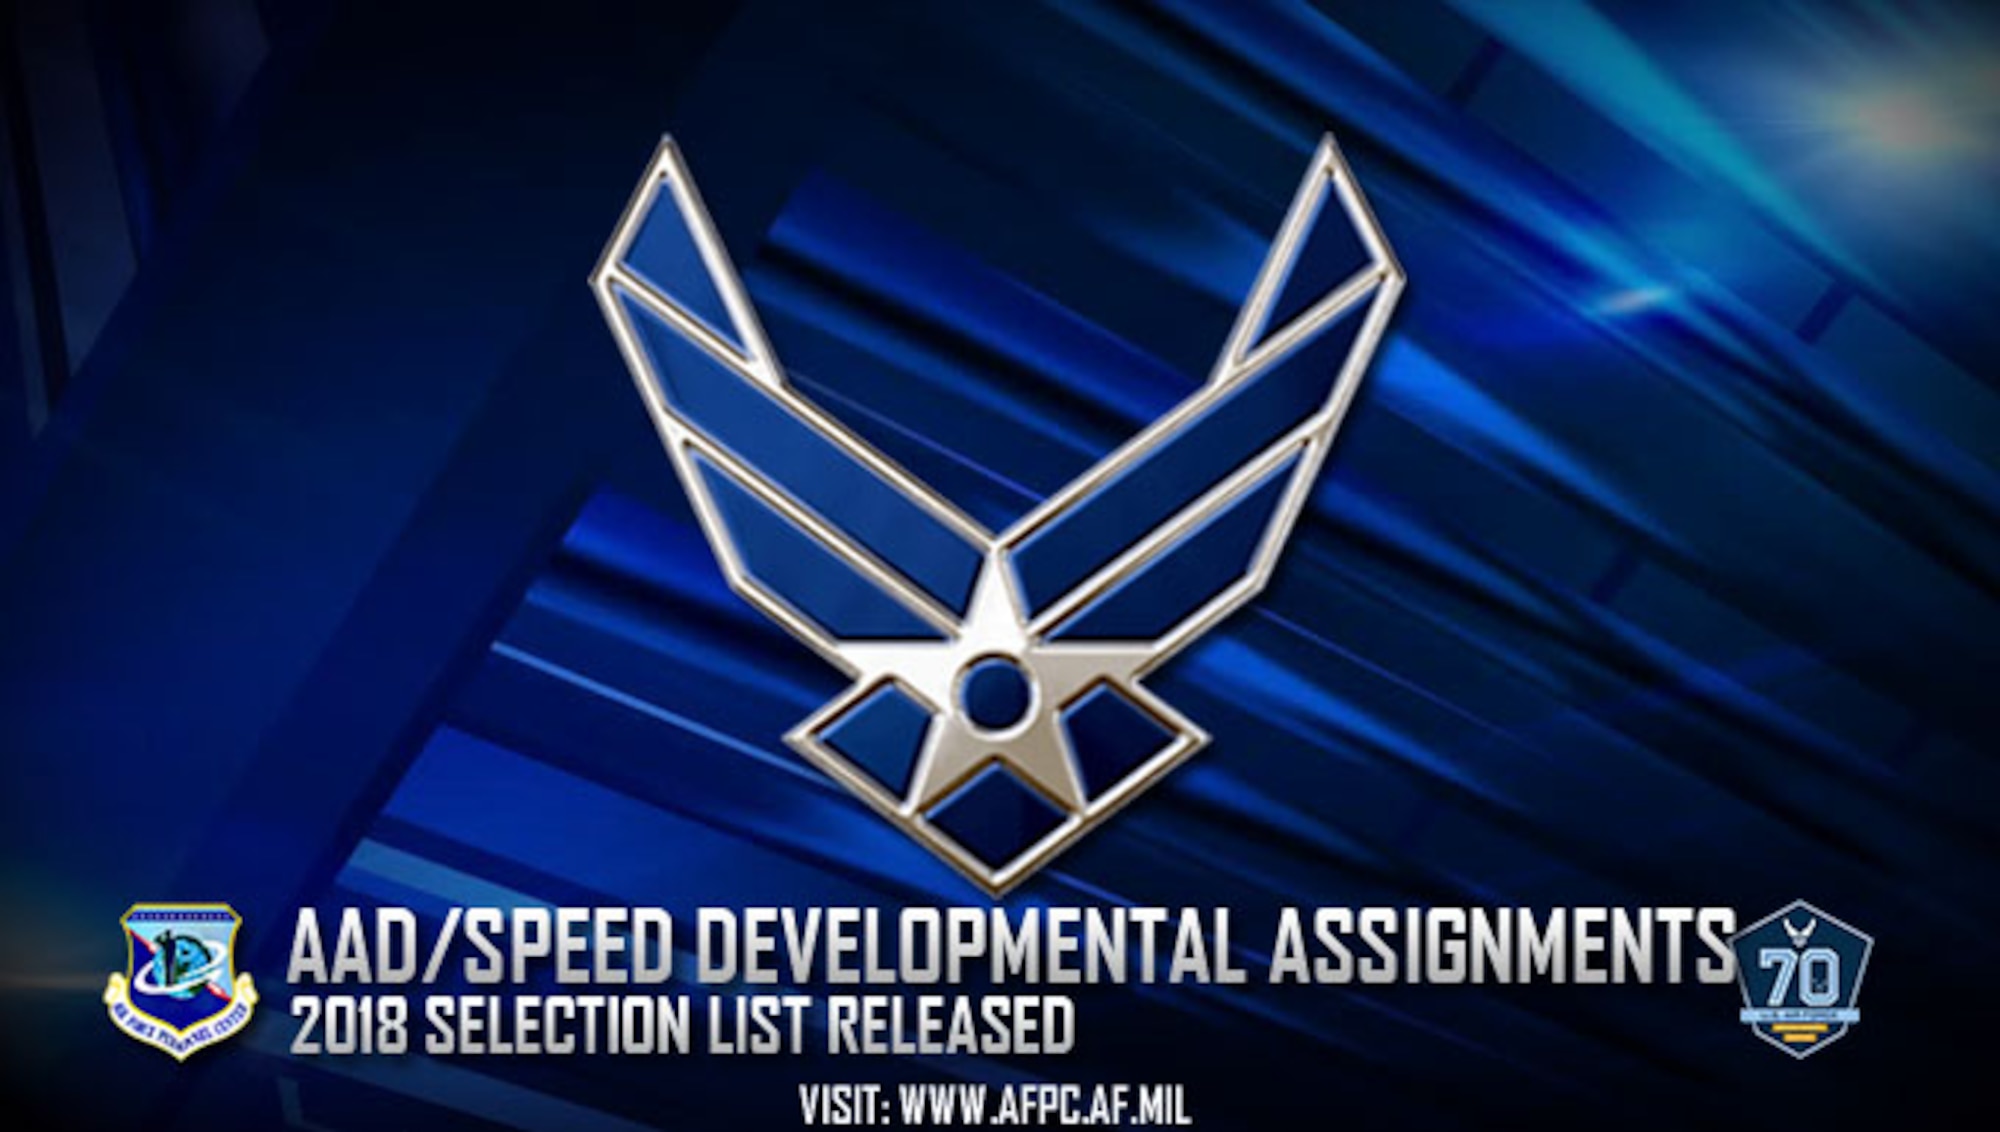 AAD/SPEED developmental assignments; 2018 selection list released